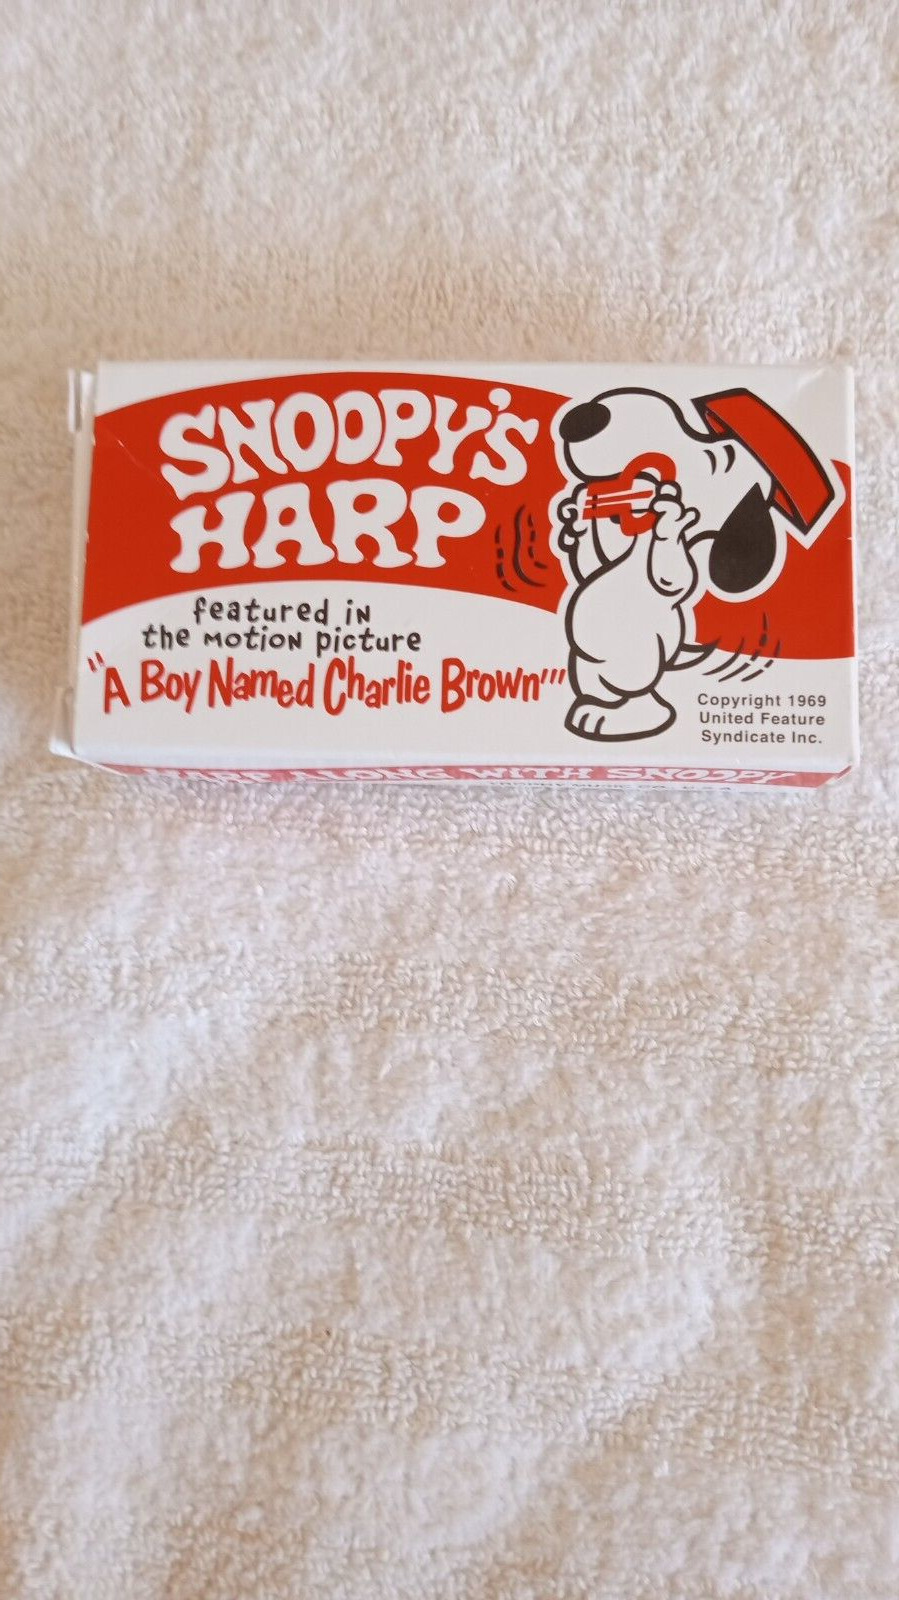 Vintage Snoopy’s Harp - Made In USA Copyright 1969 United Feature Syndicate Inc.